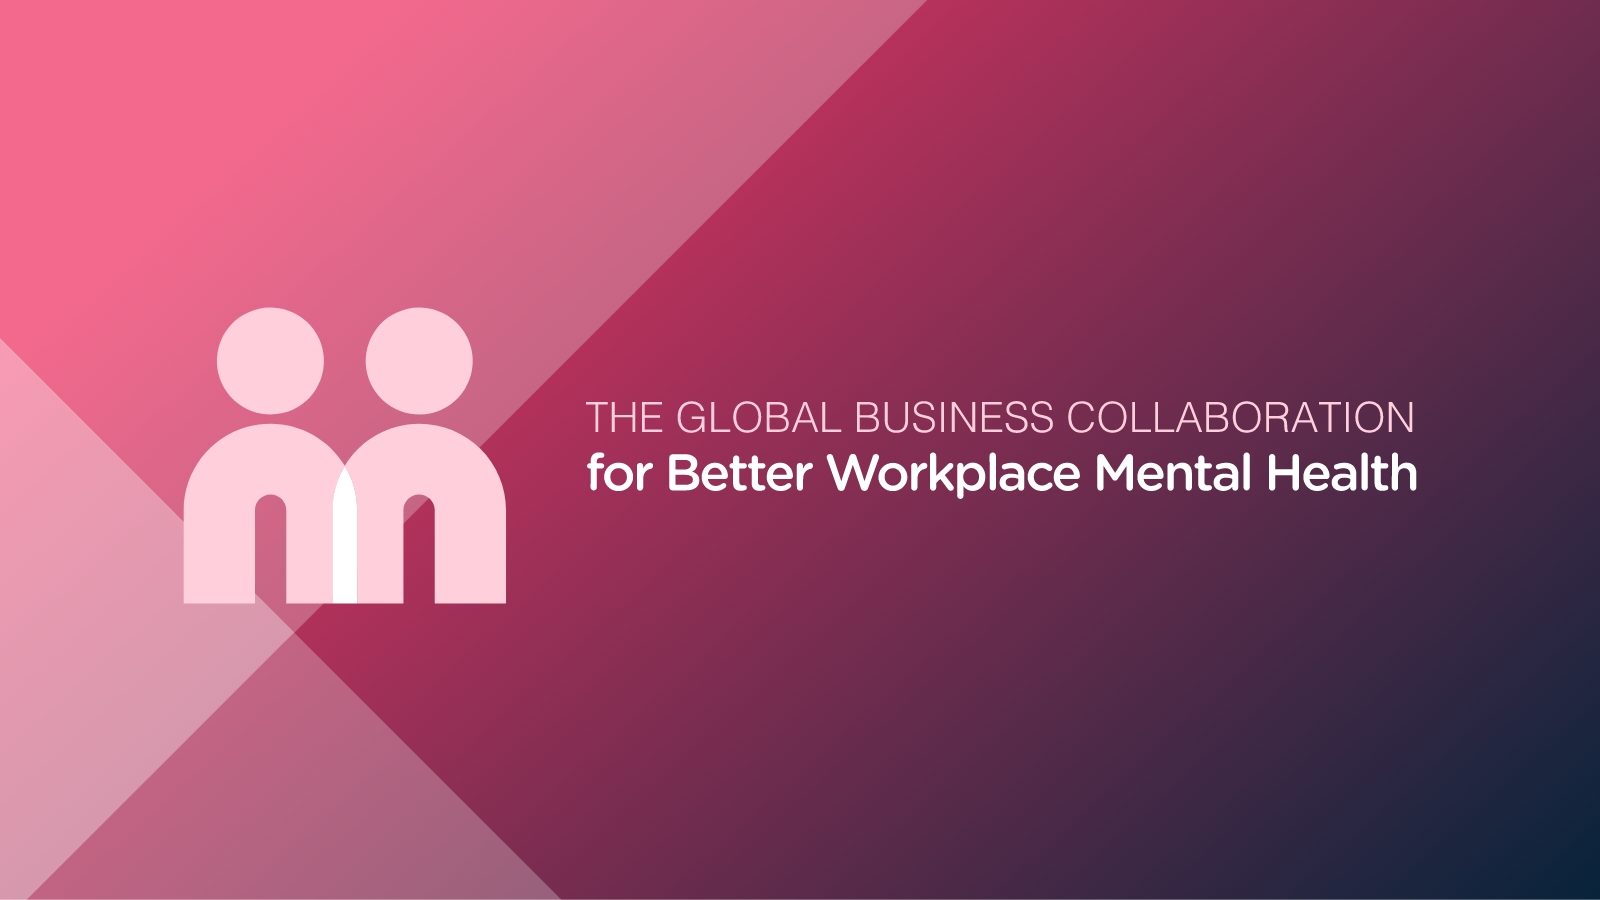 Creating a workplace that supports better mental health